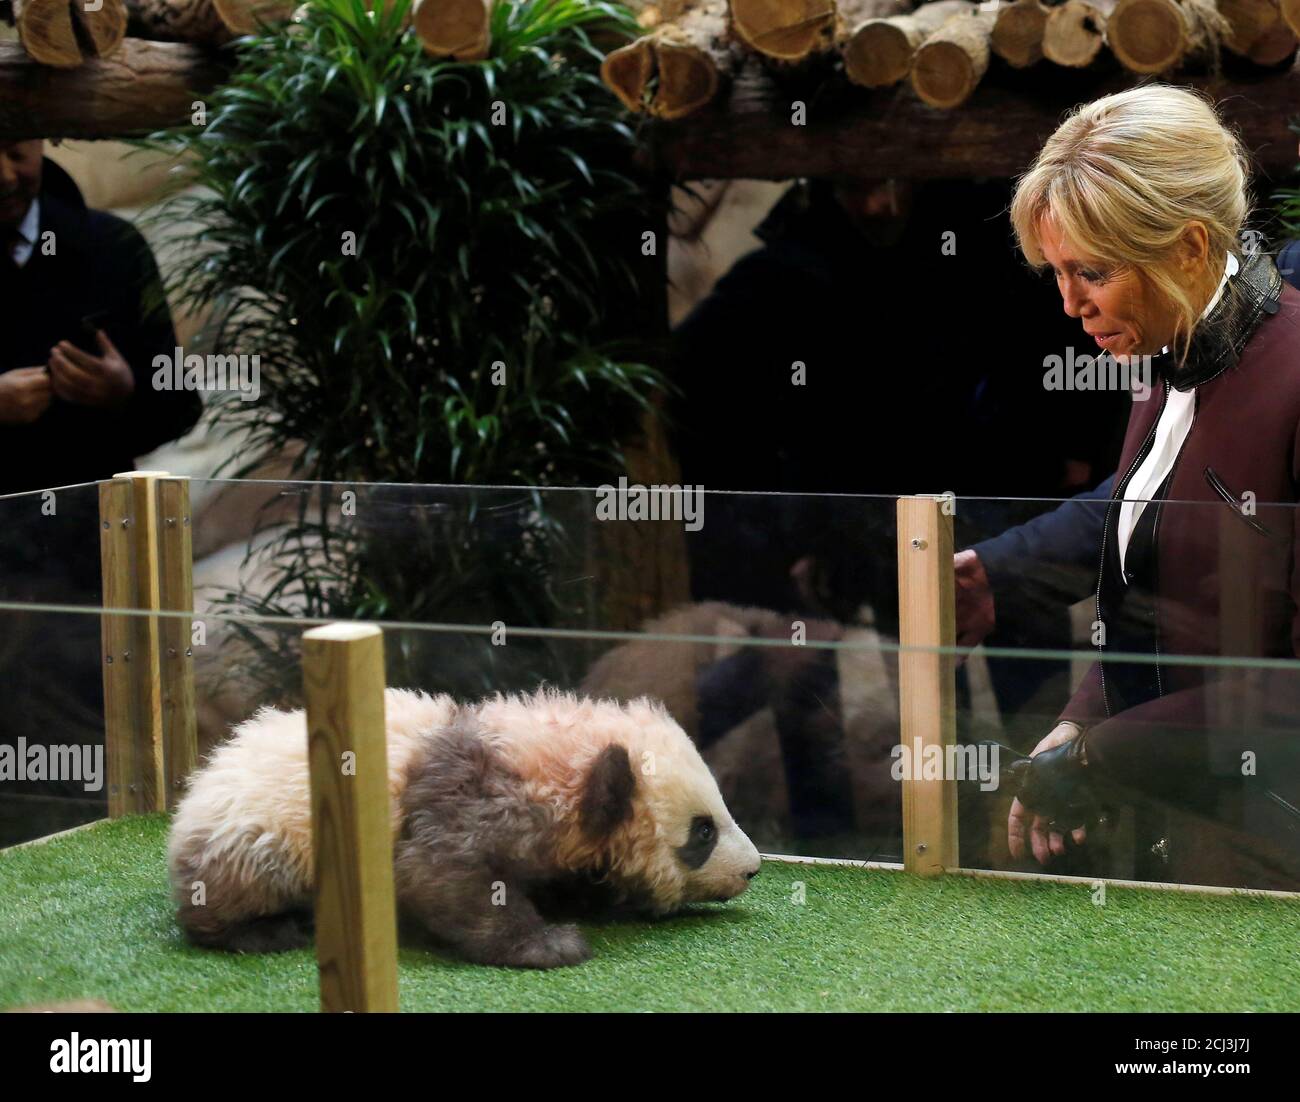 Brigitte Macron, wife of the French president, attends a naming ceremony of the panda born at the Beauval Zoo in Saint-Aignan-sur-Cher, France, December 4, 2017. The 4-month-old cub is called Yuan Meng, which means “the realization of a wish” or “accomplishment of a dream.”   REUTERS/Thibault Camus/Pool Stock Photo